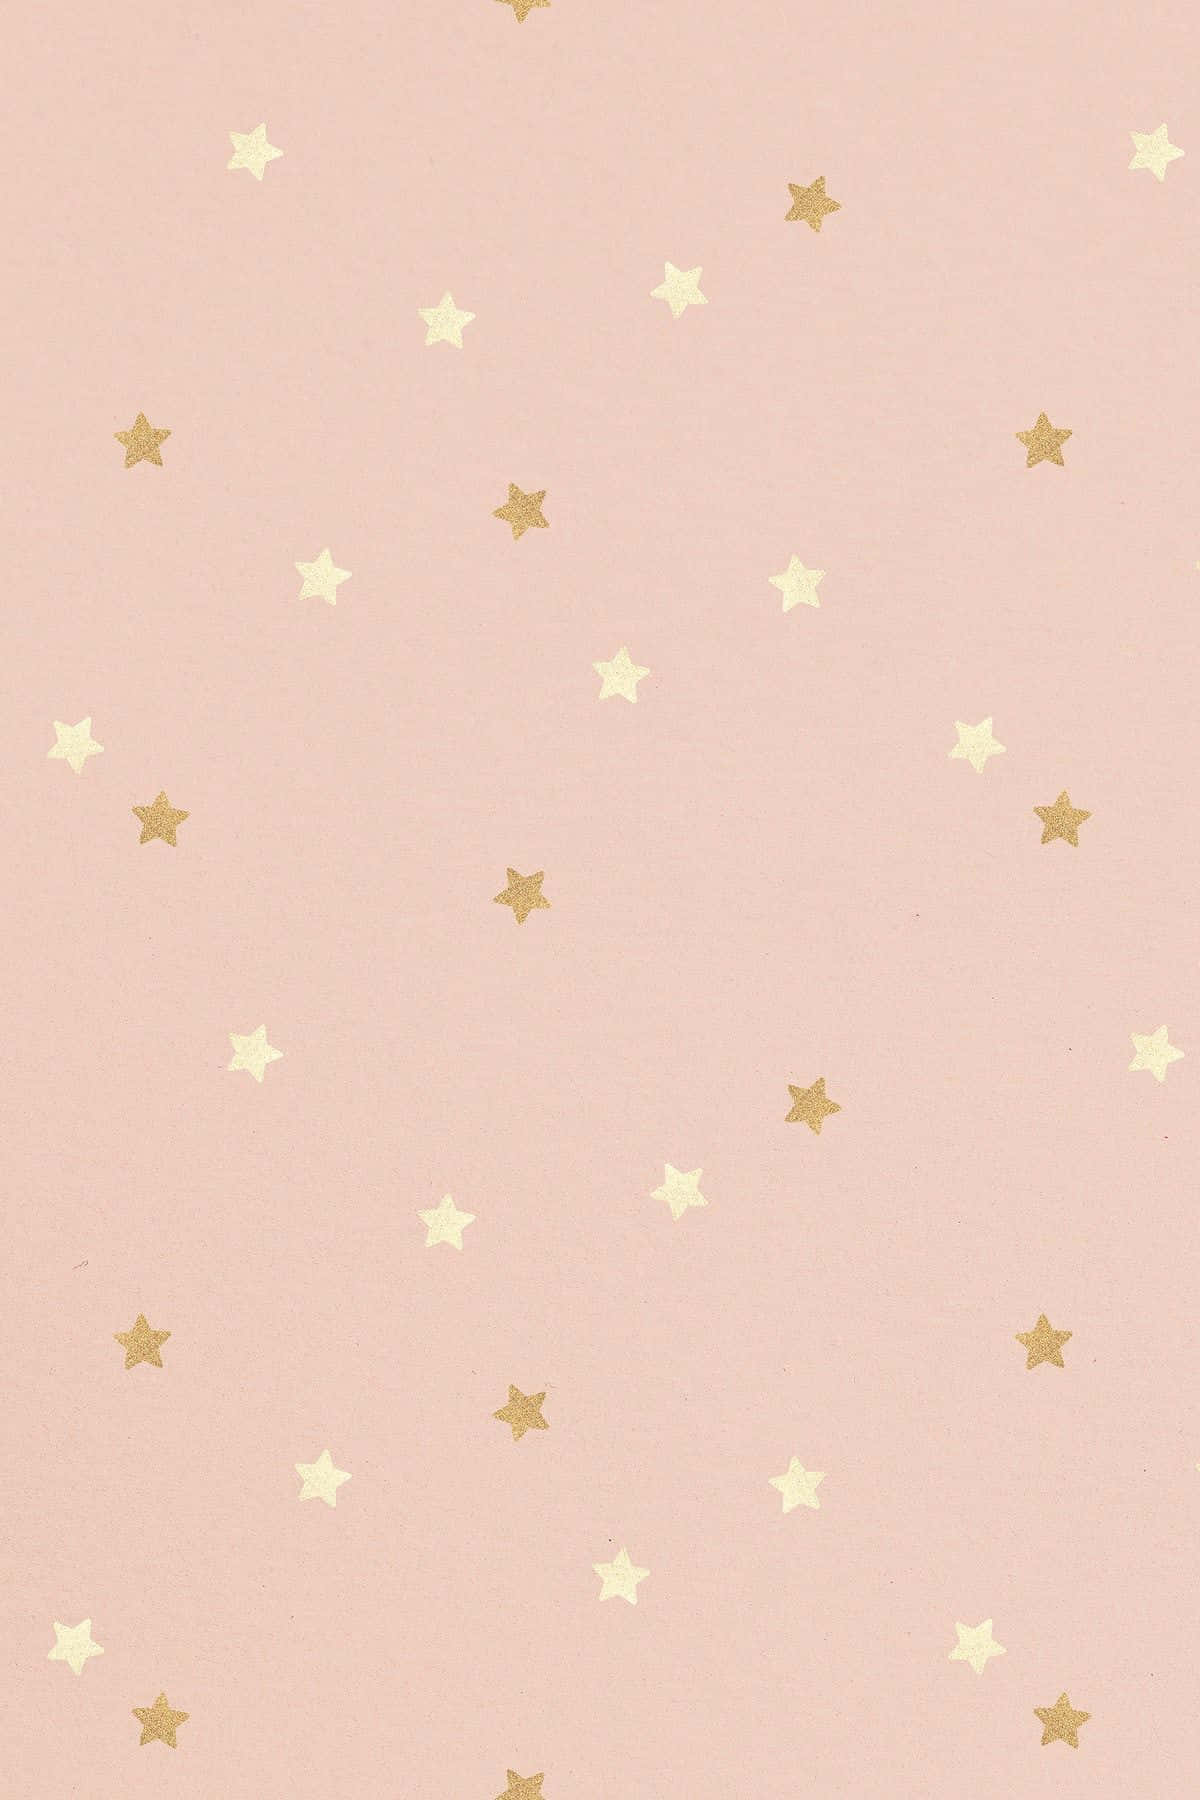 A soothing gradient background of light pink and gold Wallpaper